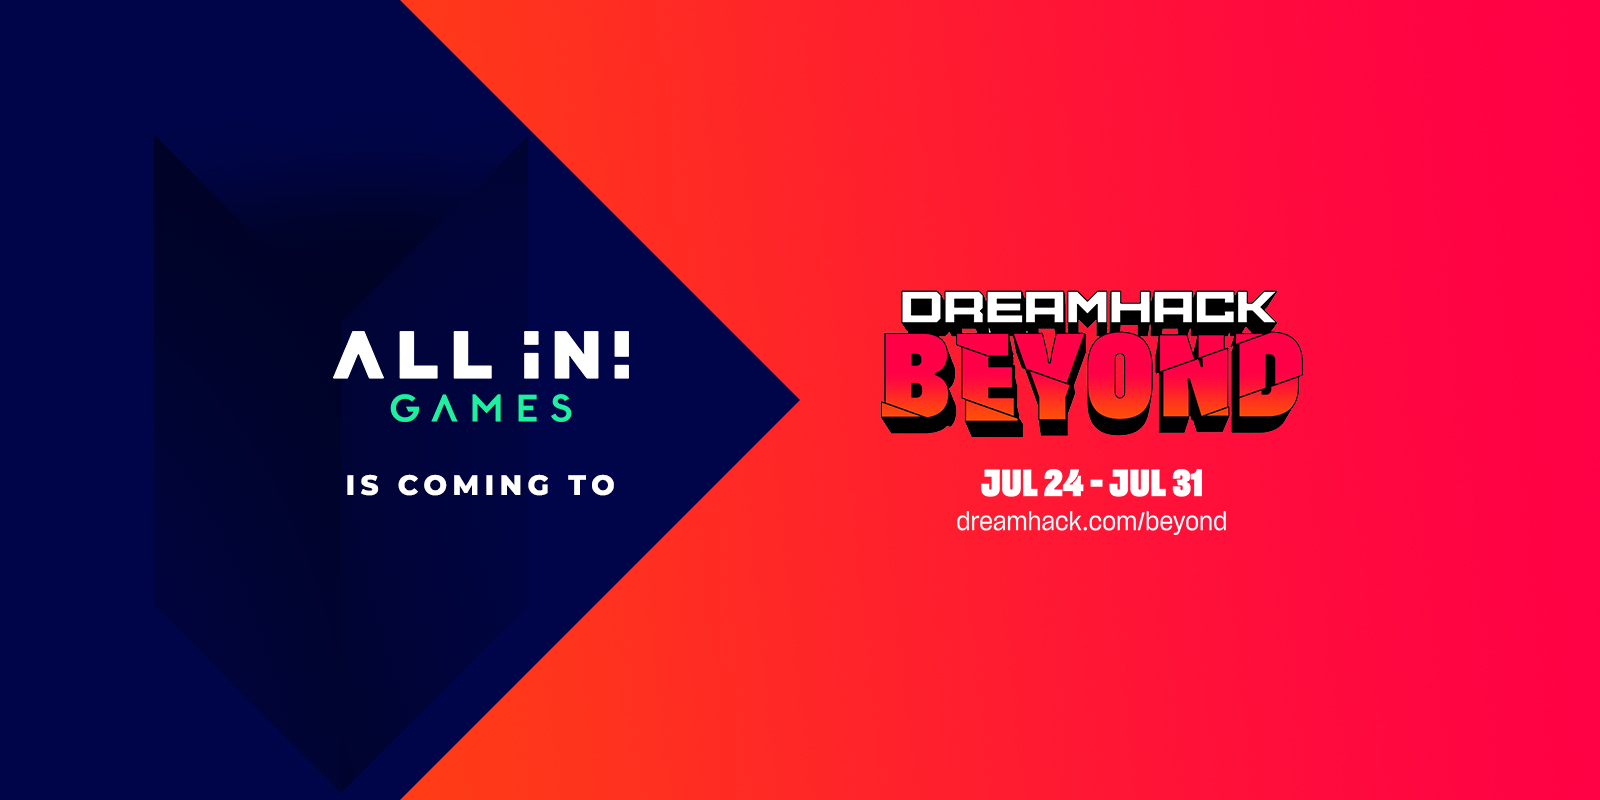 All in! Games coming to DreamHack Beyond